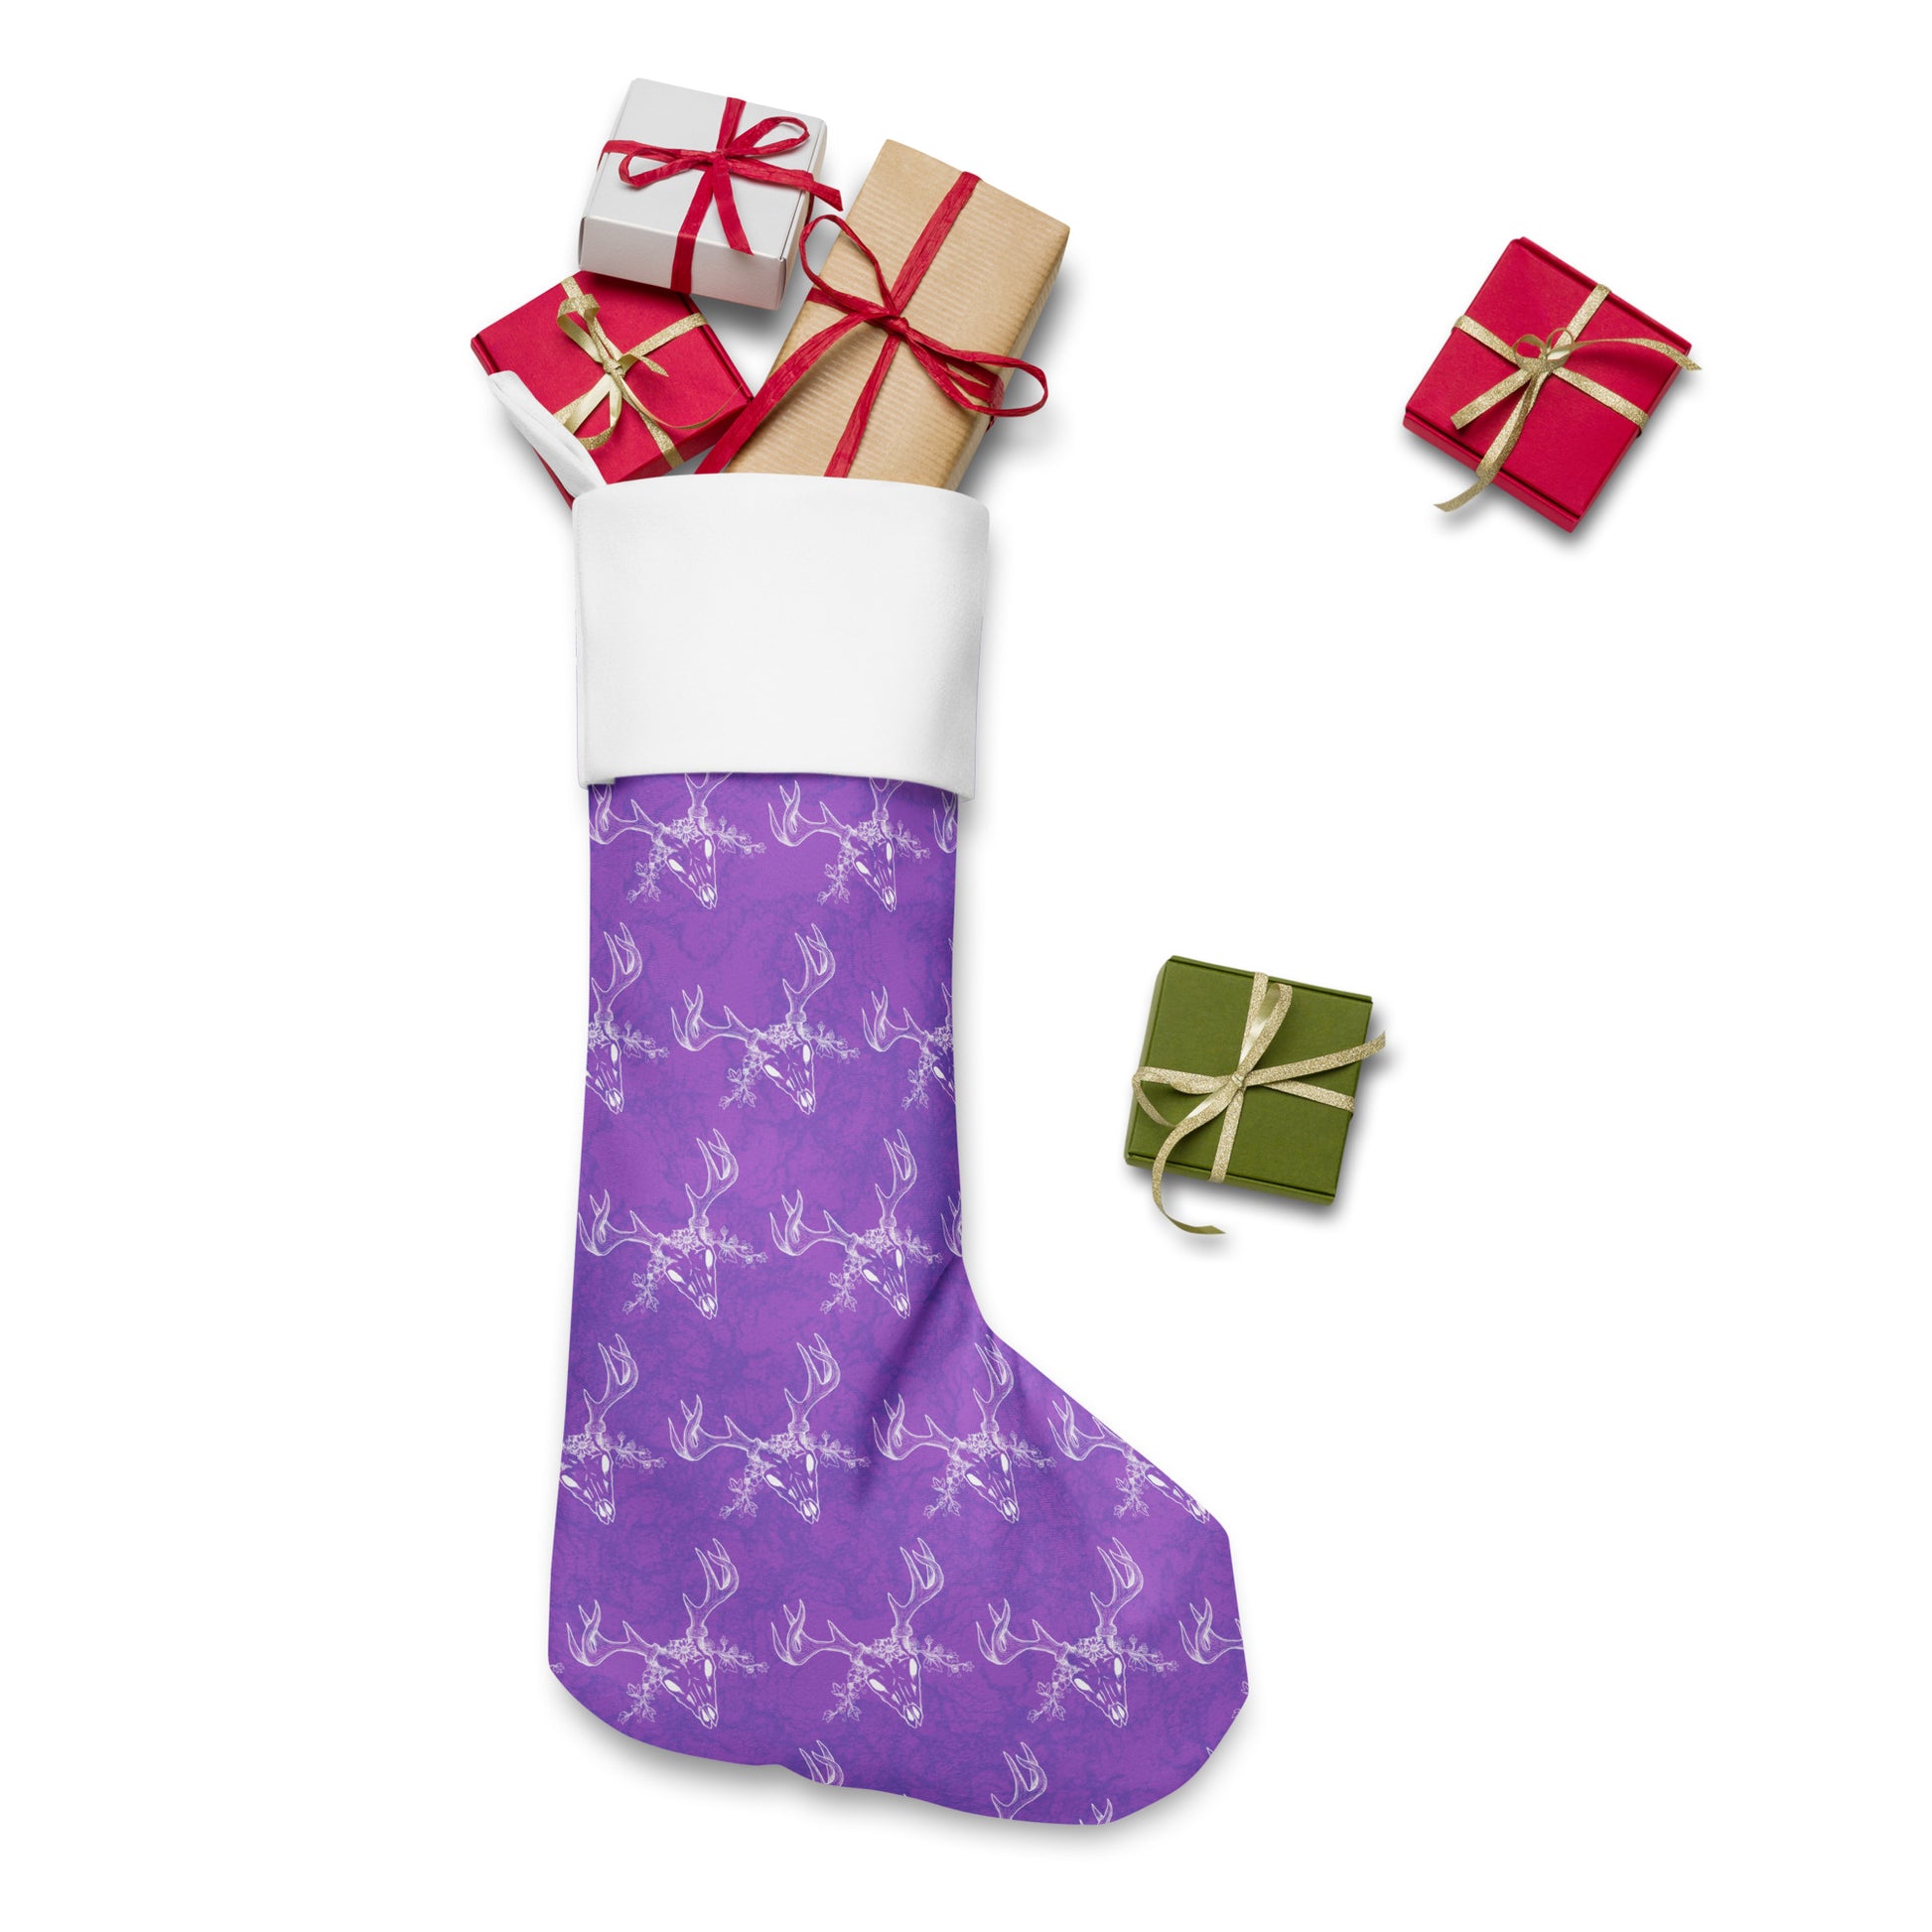 Limited Edition Purple Deer Skull Christmas Stocking.  7 by 18 inches. The front has a hand-illustrated deer skull design on a purple background with an off-white polyester fabric on the back. It has a white fold-over cuff and a loop for hanging. Shown stuffed with presents.